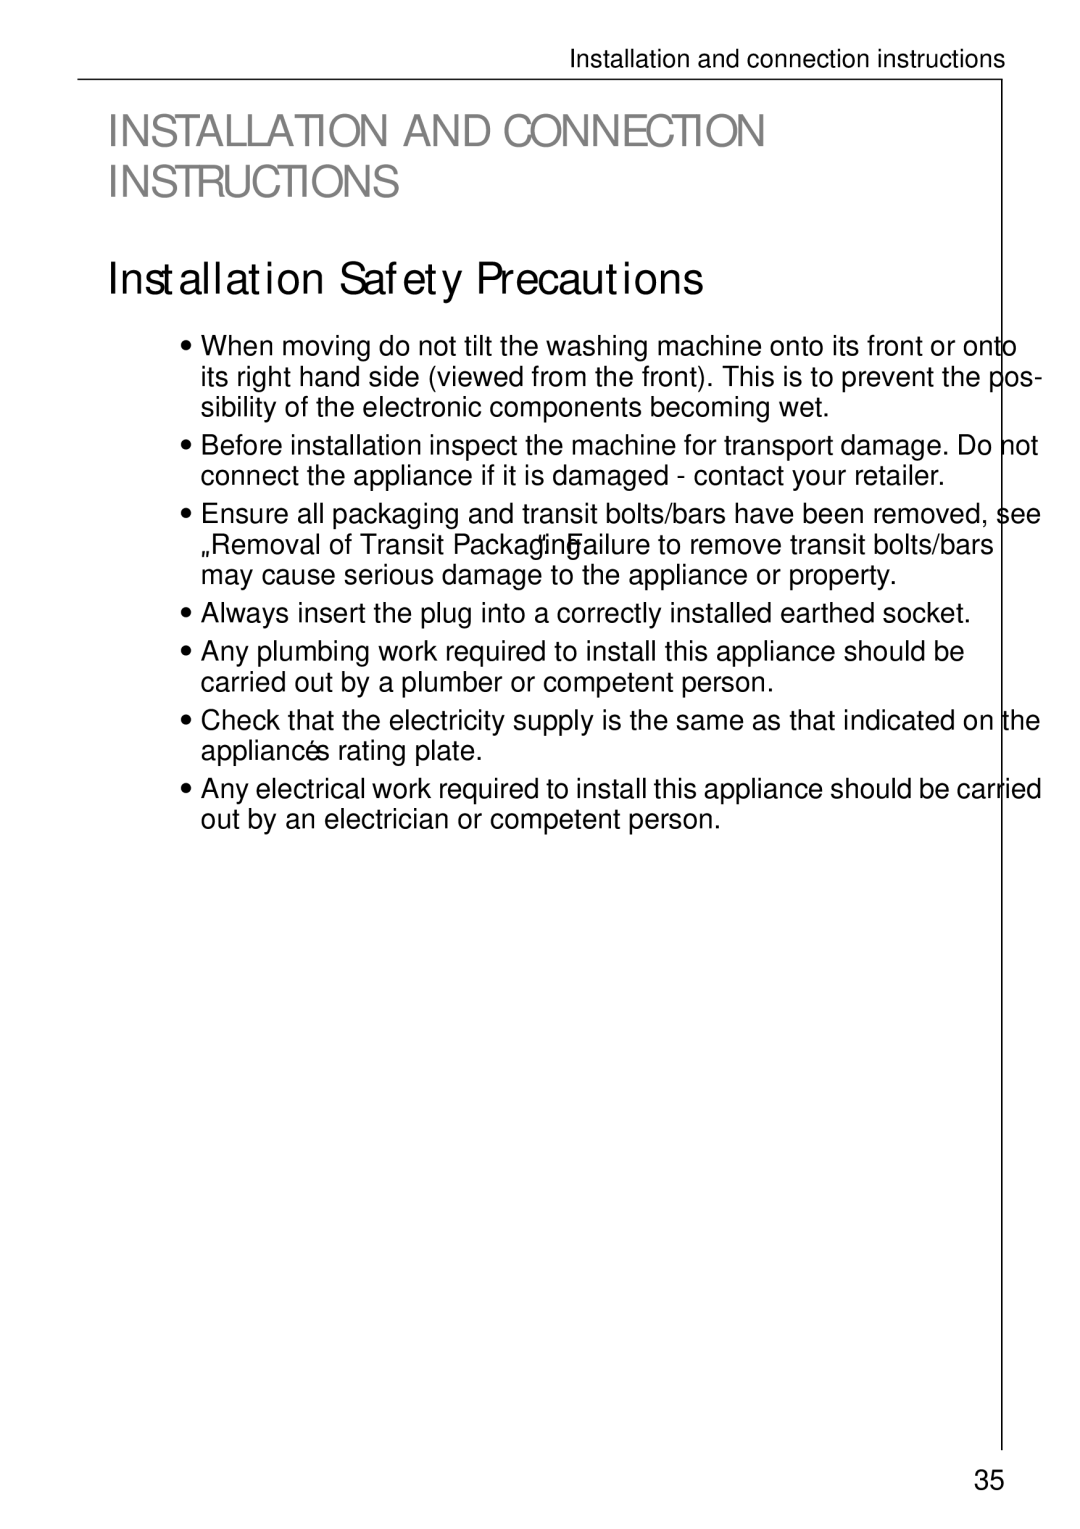 Electrolux 50630 manual Installation and Connection Instructions, Installation Safety Precautions 